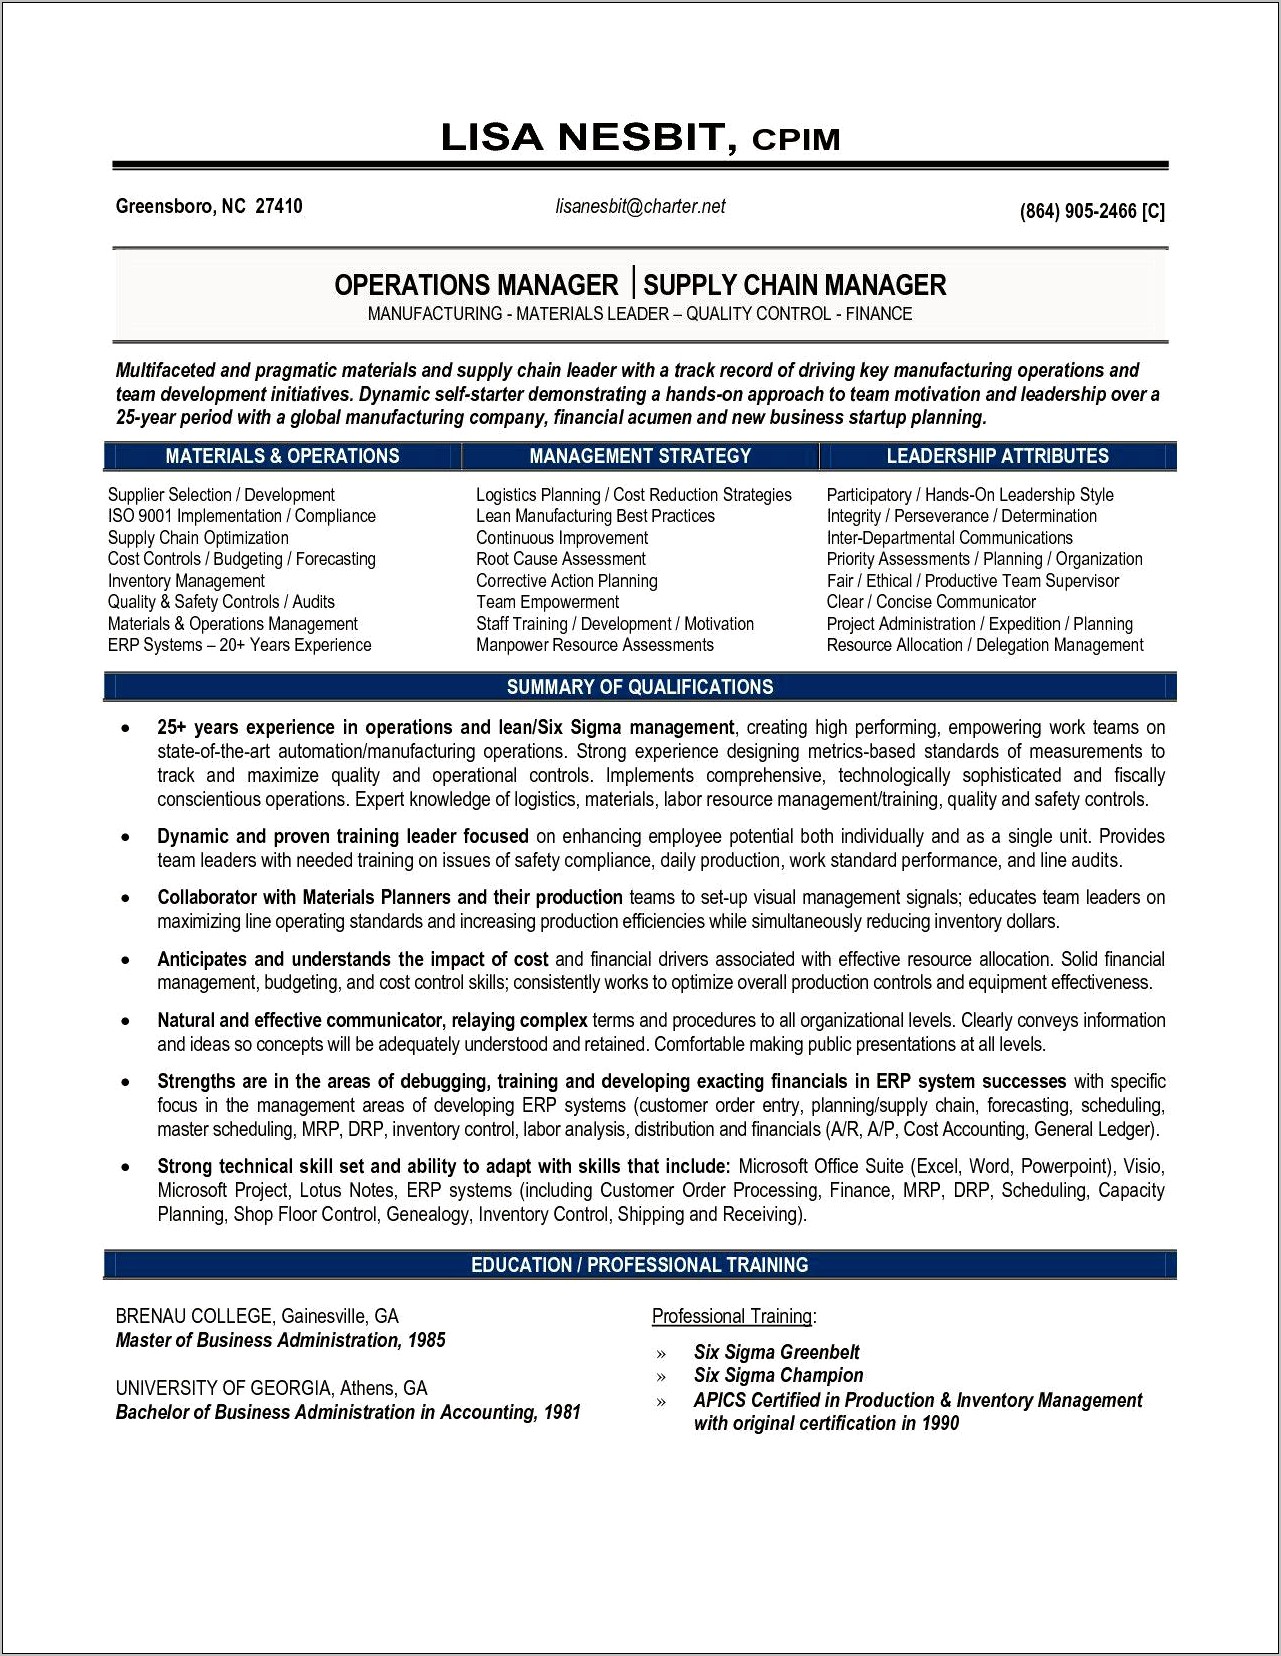 Examples Of Resumes For Supply Chain Managers